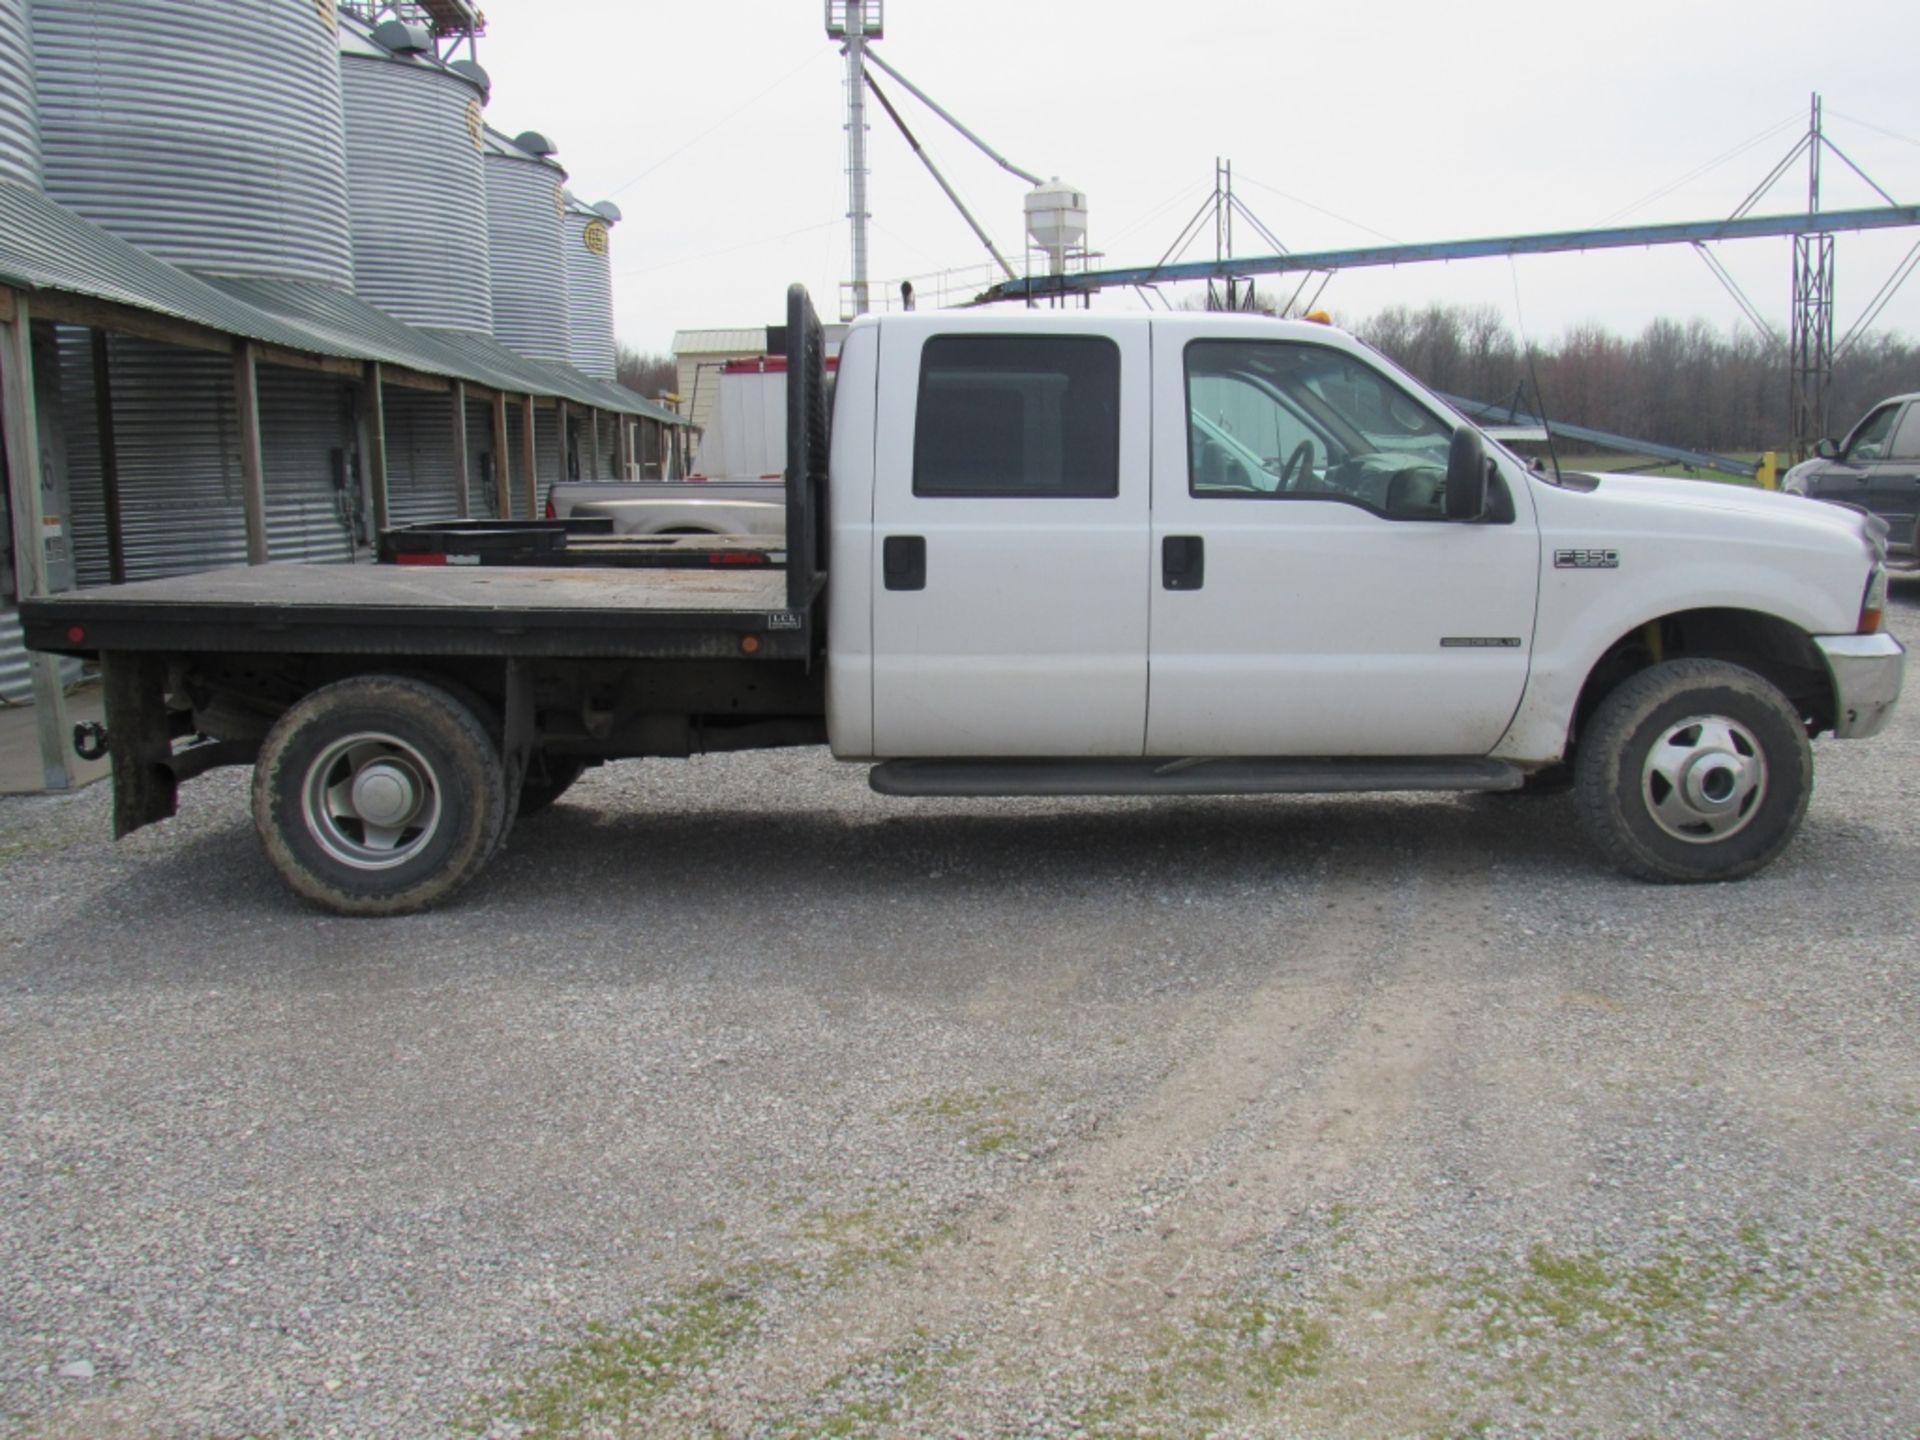 2001 Ford F350 Lariat Flatbed 4wd 7.3 L Powerstroke Diesel Engine - Image 7 of 21